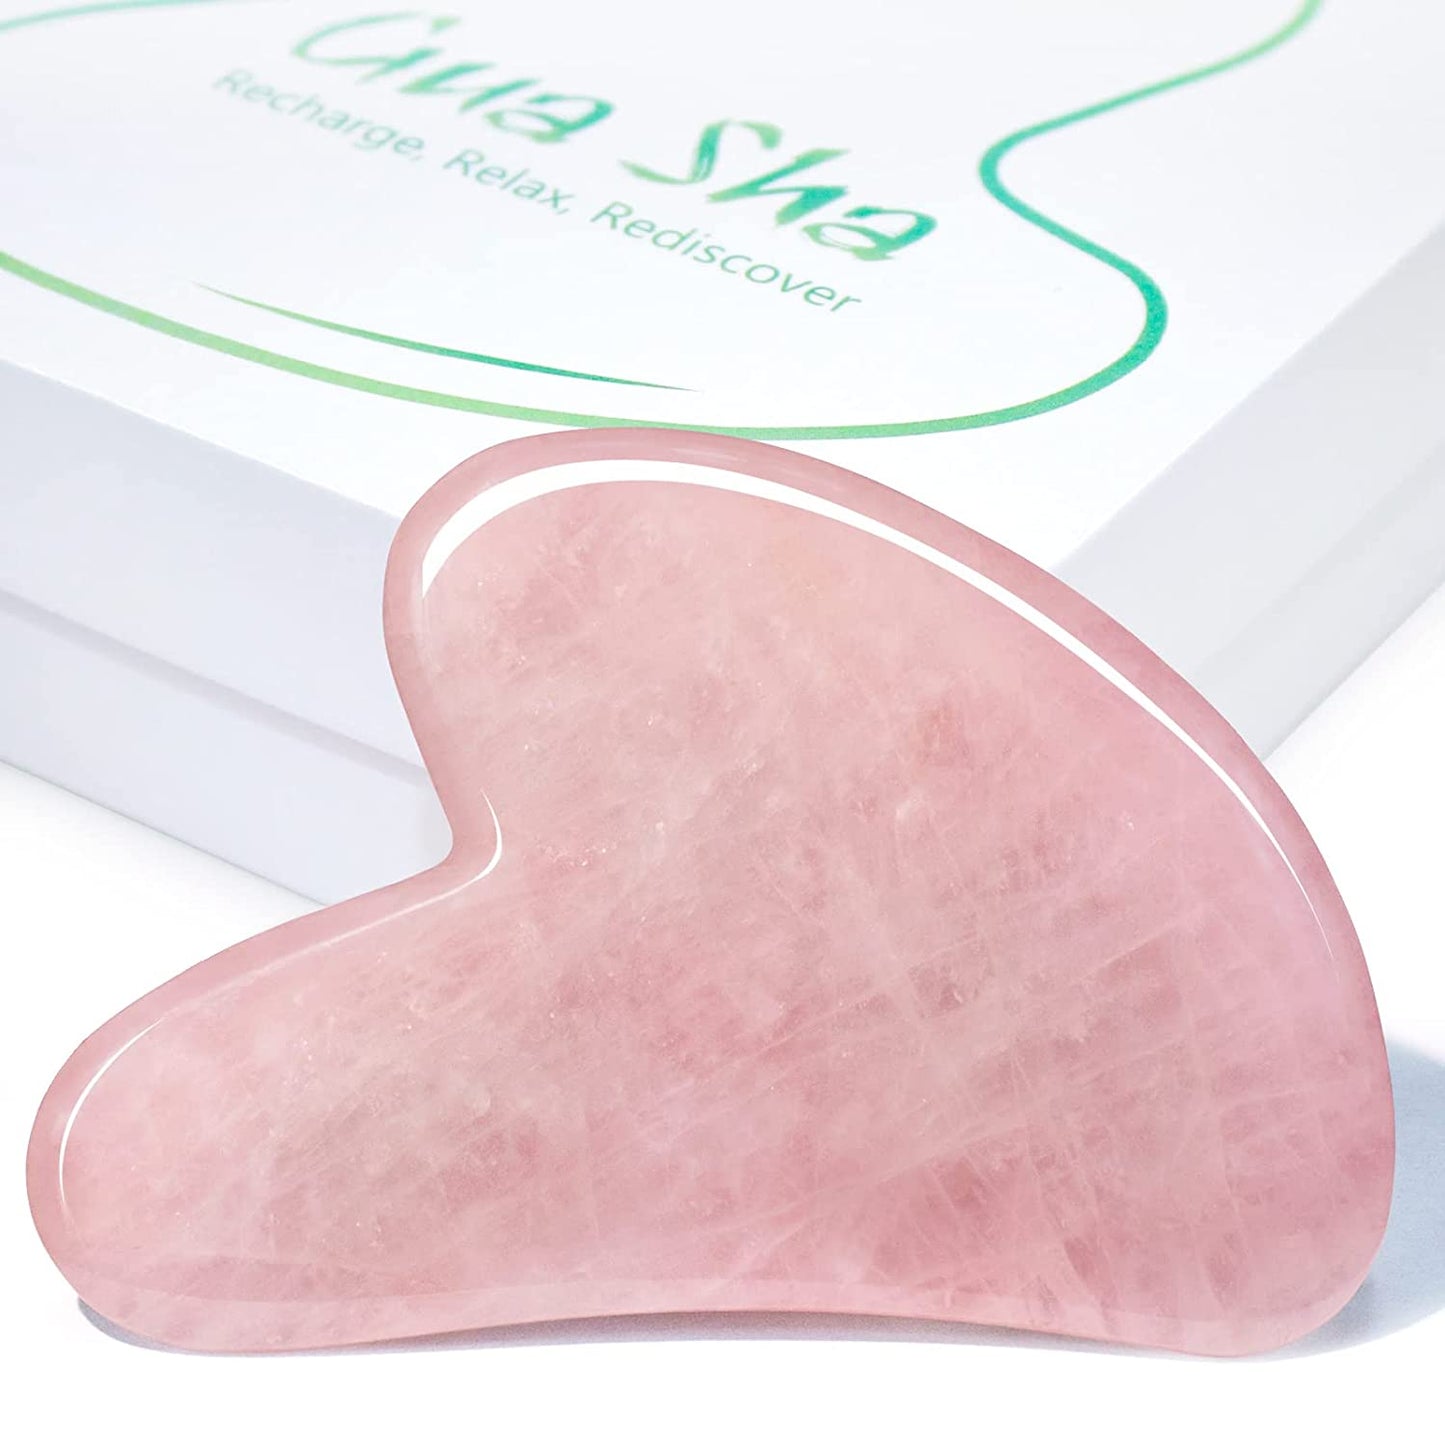 BEAKEY Gua Sha Facial Tool for Self Care, Massage Tool for Face and Body Treatment, Made of Rose Quartz, Relieve Tensions and Reduce Puffiness - BEAKEY